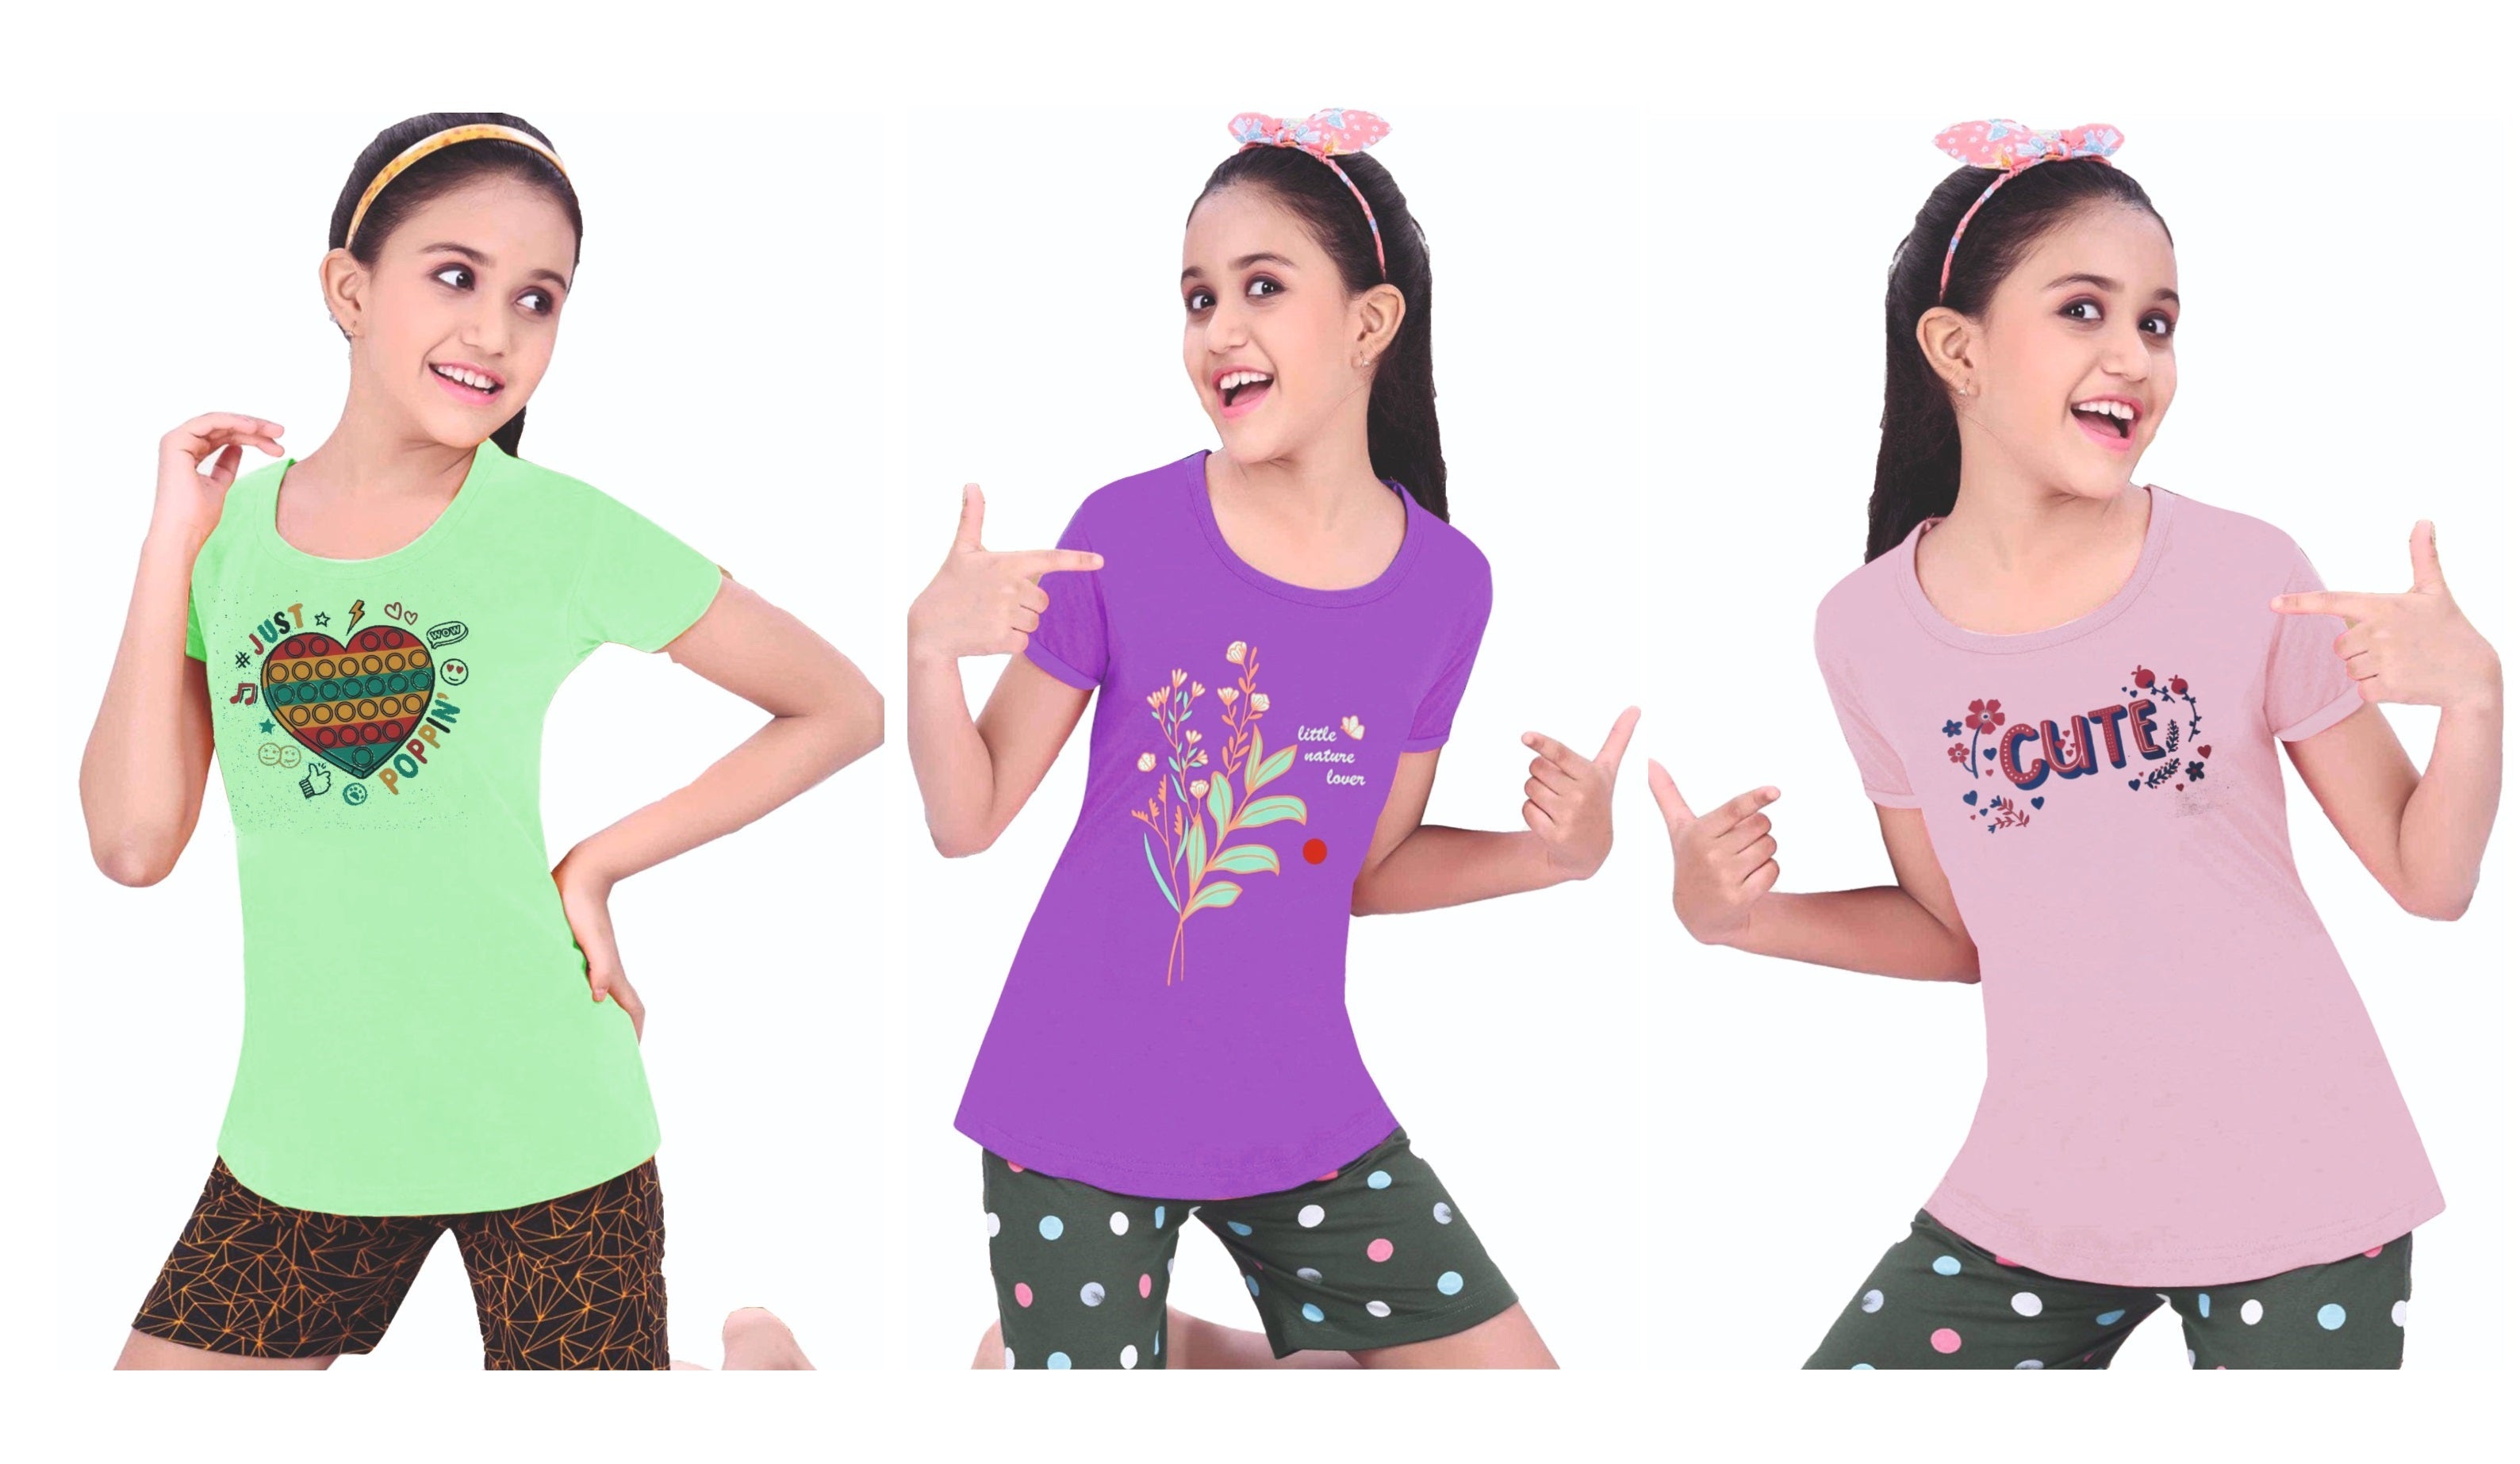 Girls Cotton fancy printed Tshirt Pack of 3